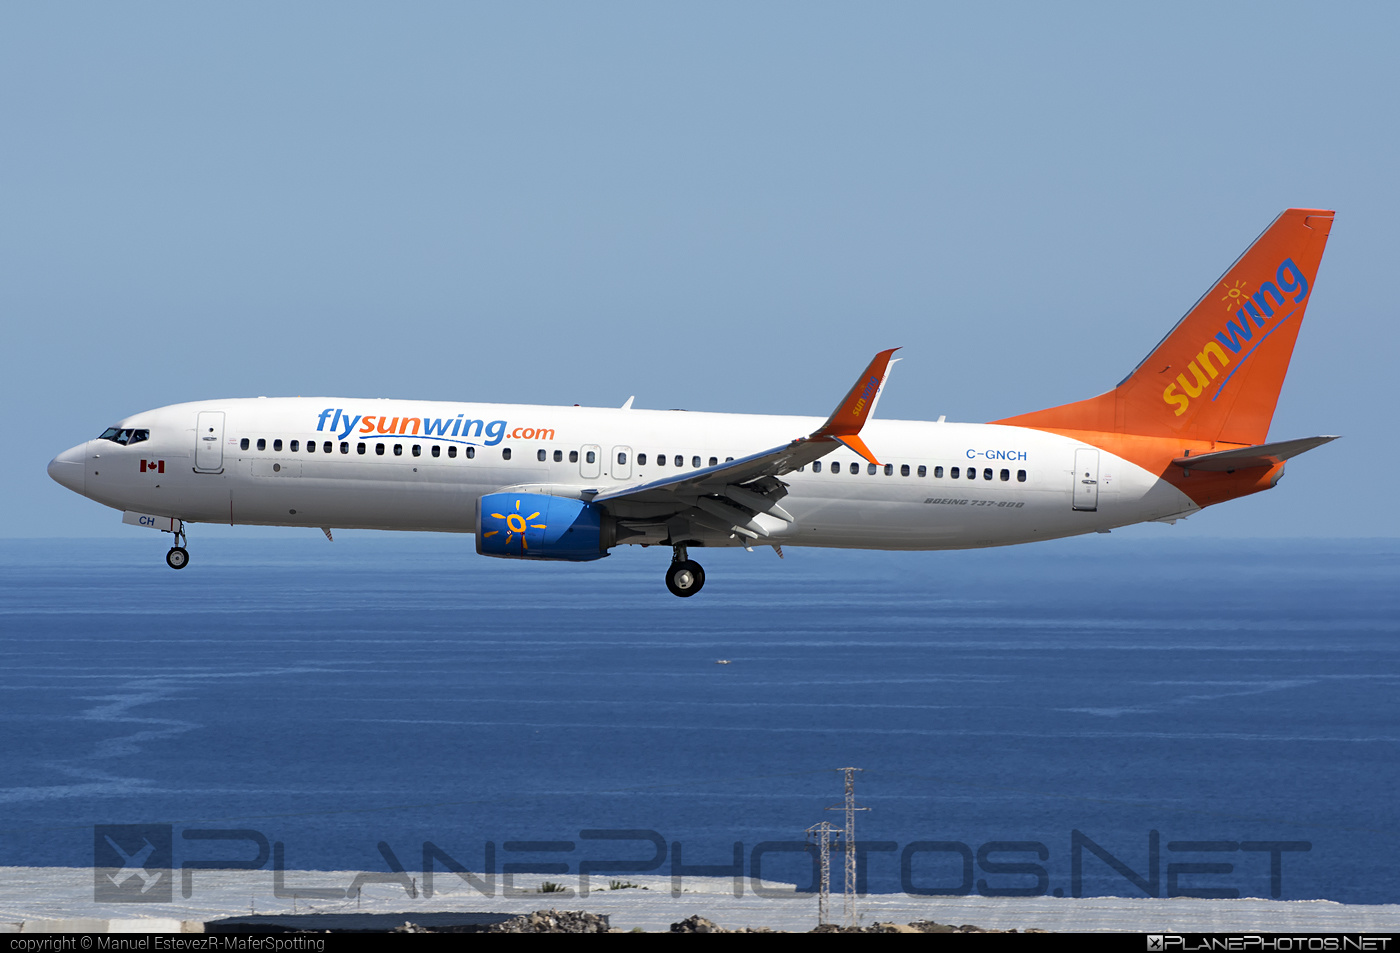 C Gnch Boeing 737 800 Operated By Sunwing Airlines Taken